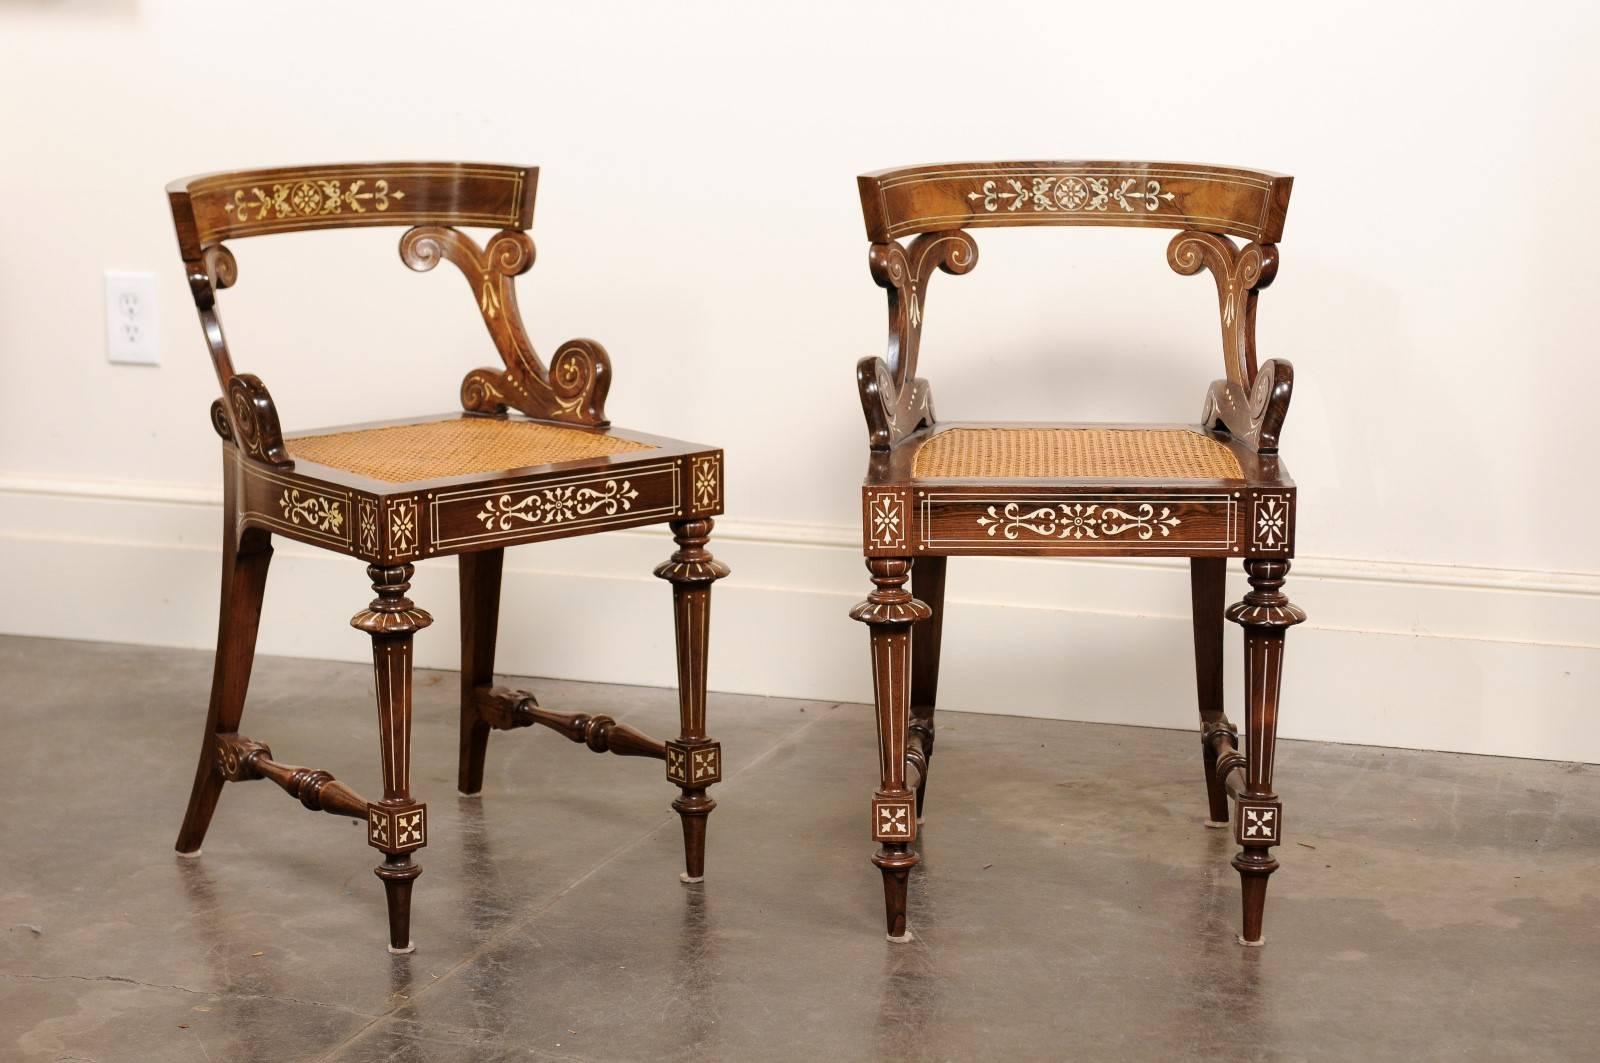 This pair of small size Anglo-Indian slipper chairs from the early 20th century features an exquisite décor combined with elegant lines. The open barrel backs are adorned on their top rail by a delicate marquetry made of bone inlay and supported by